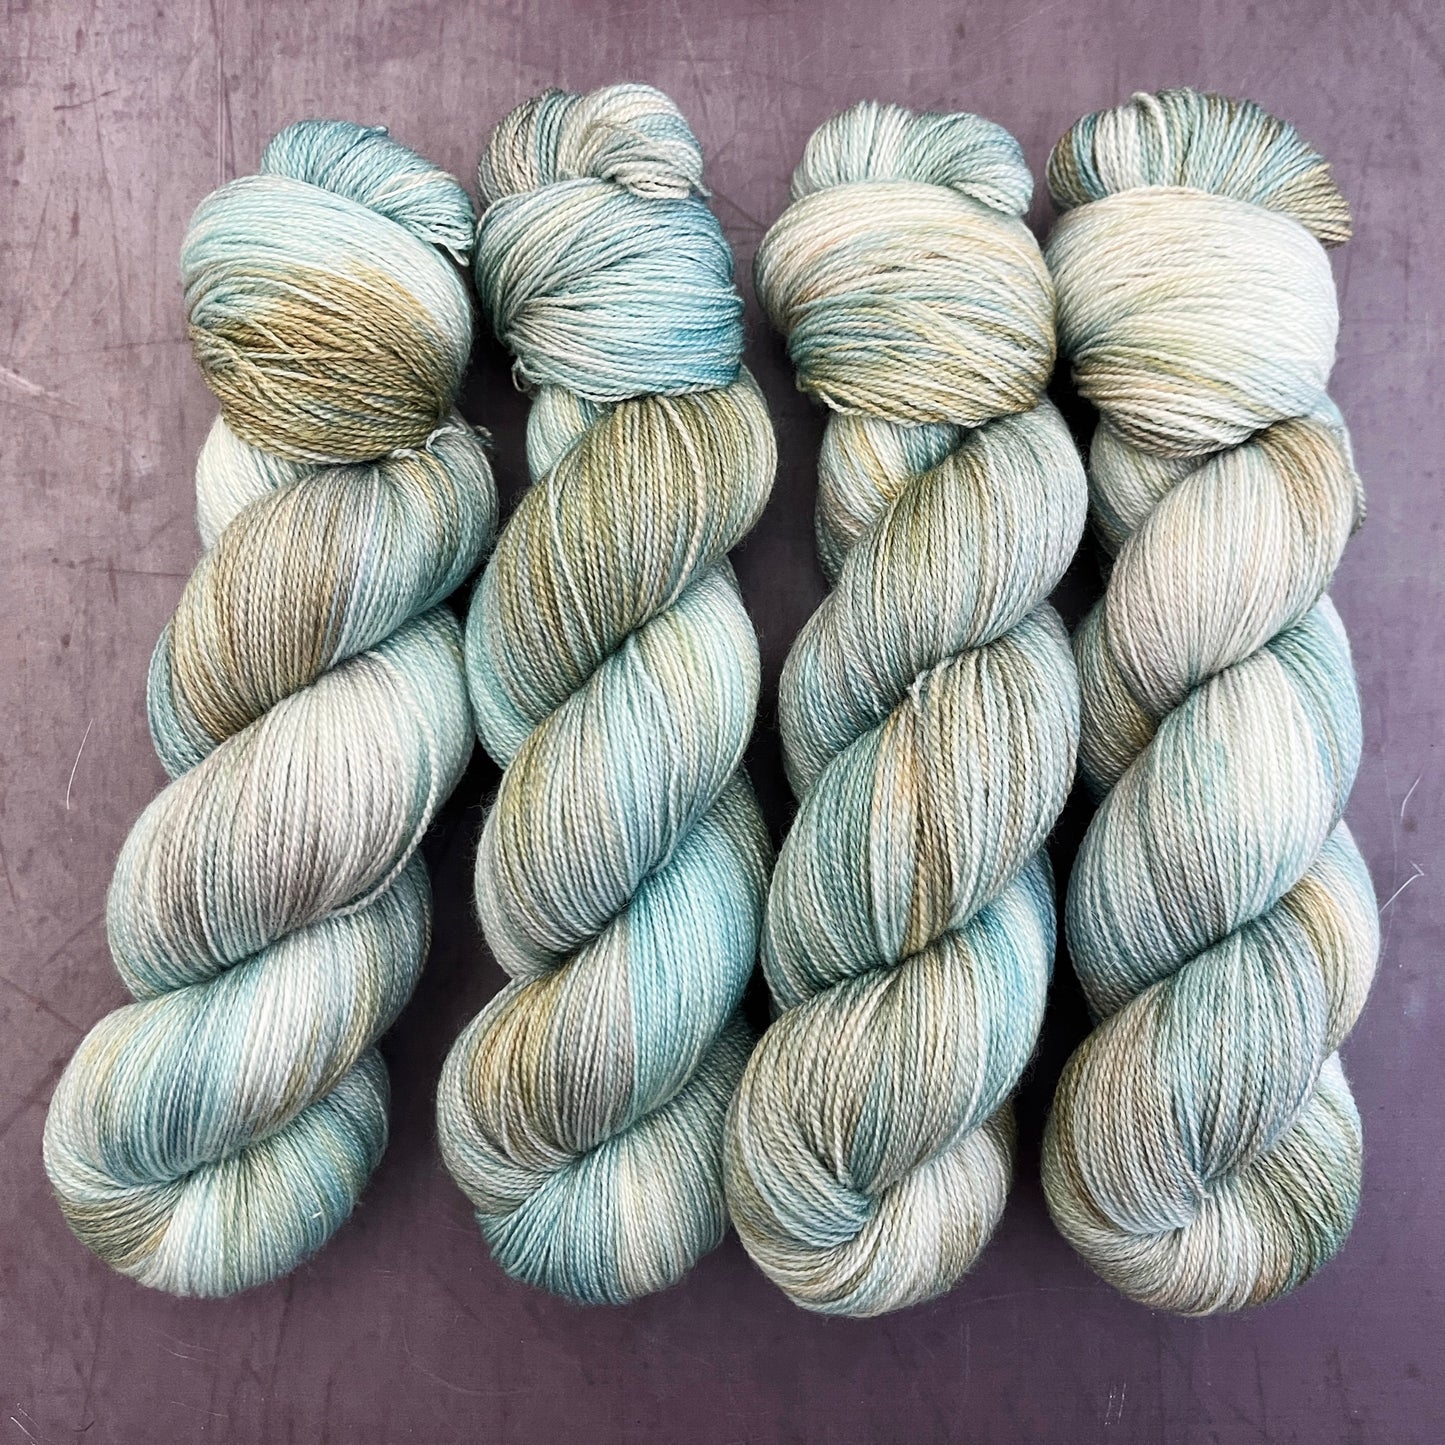 DYED TO ORDER - eynd | lace